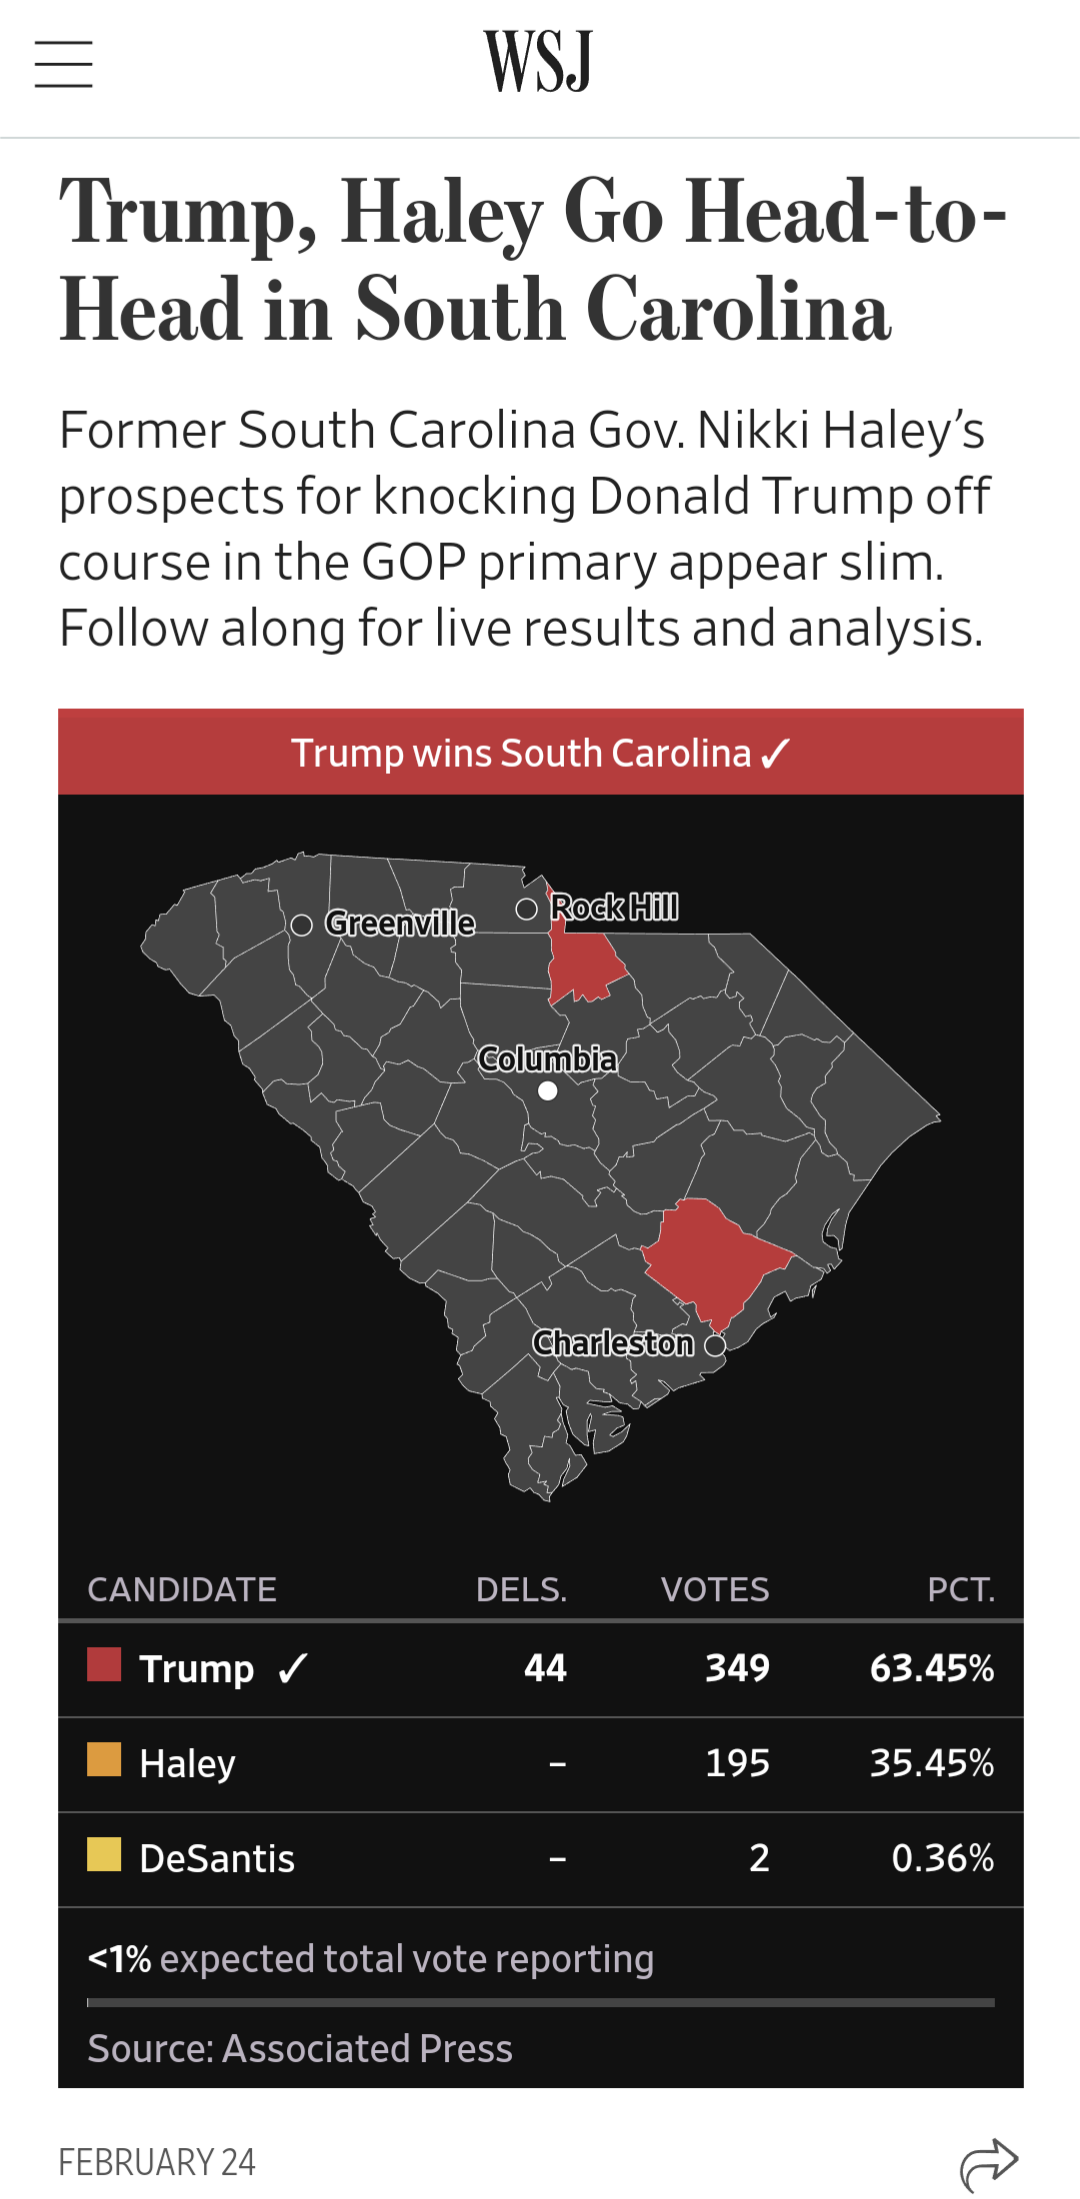 Calling SC for Trump with less than 1% of votes counted is ridiculous